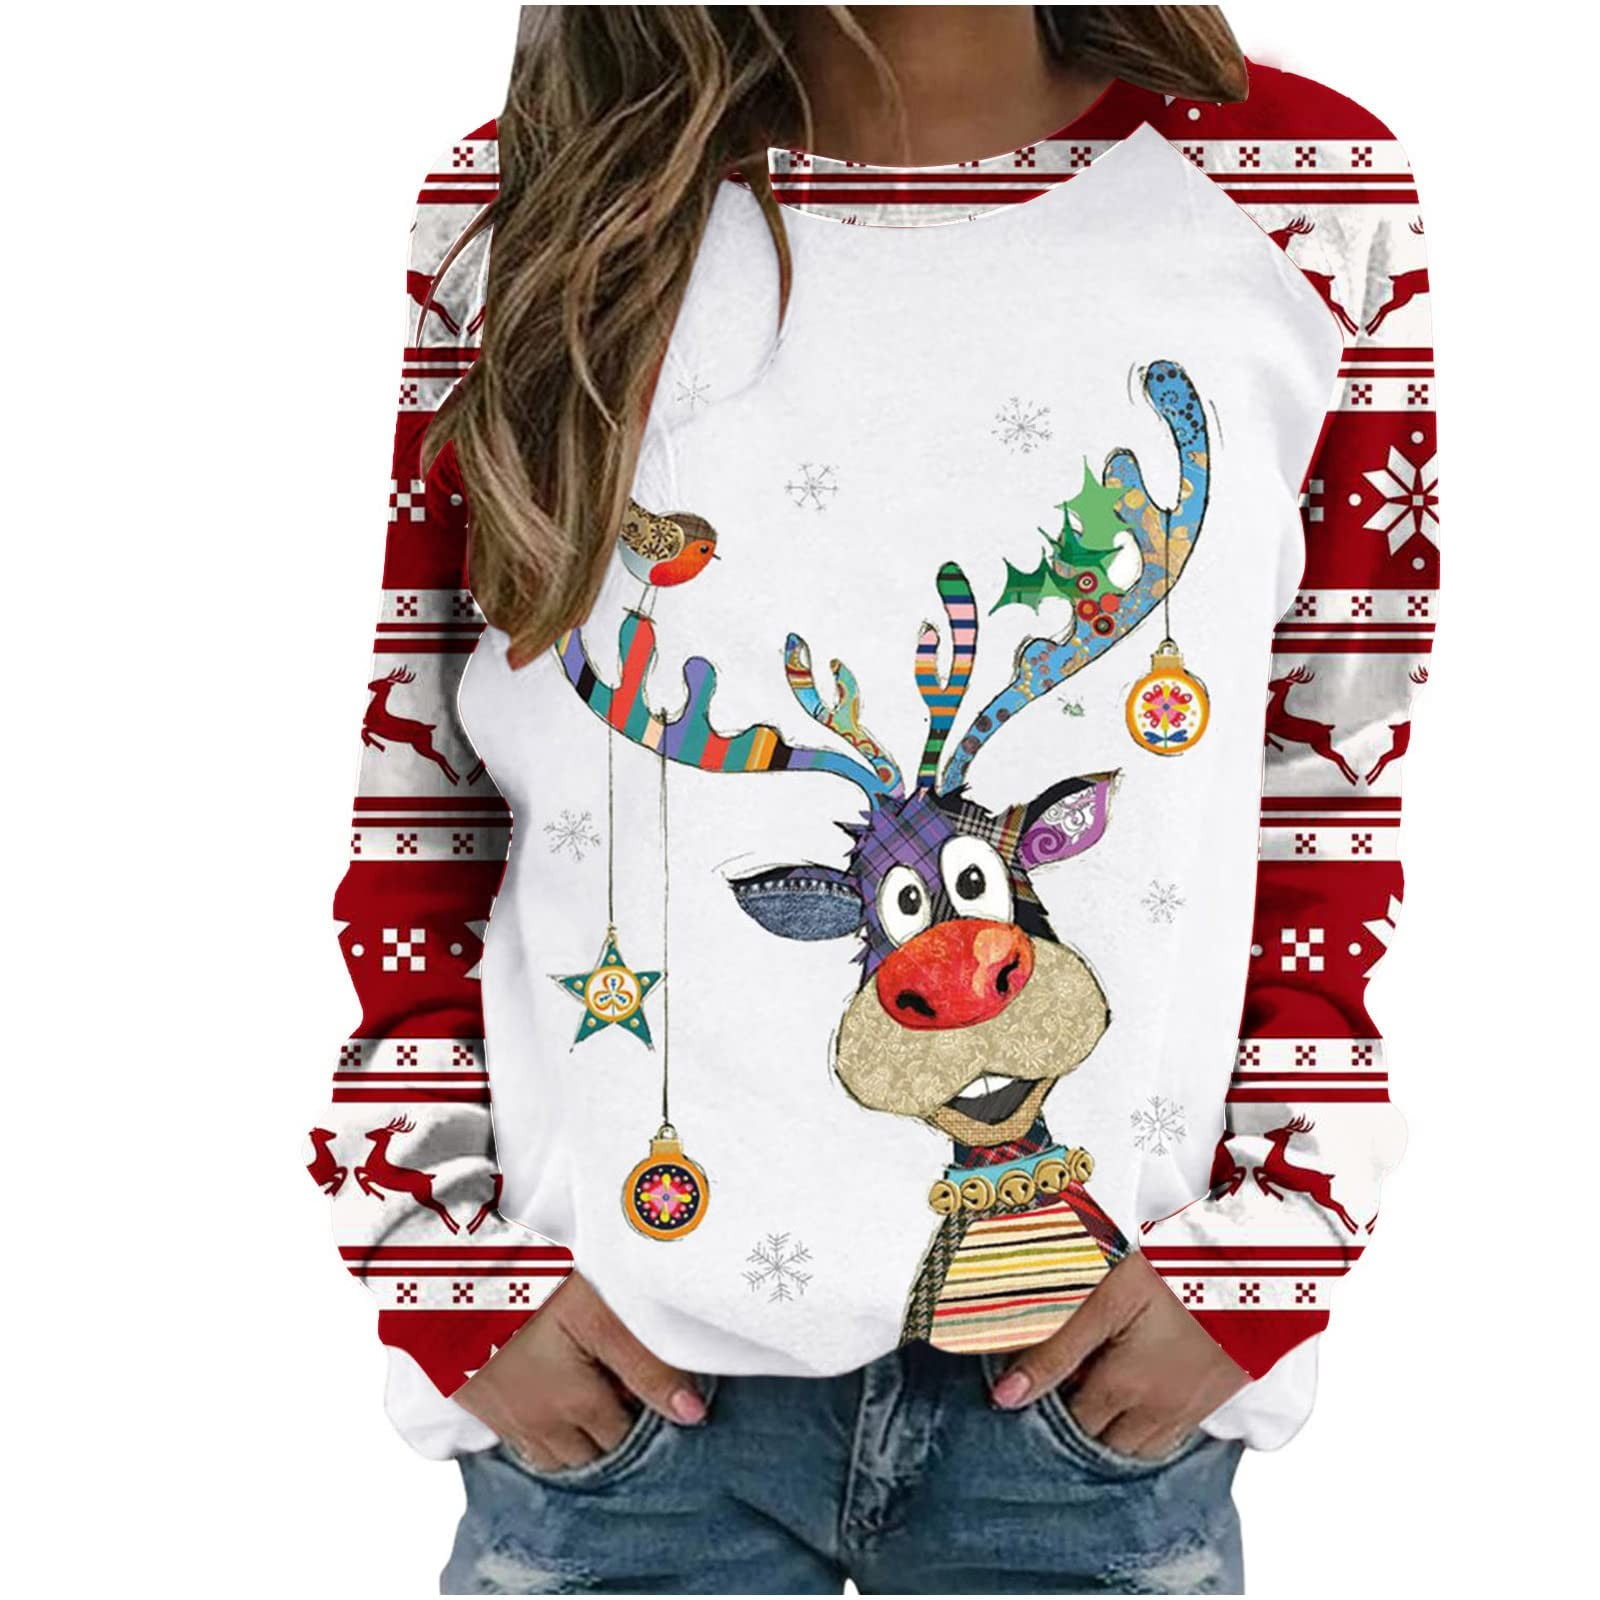 Christmas Sweater for Women Ugly Santa Snowflake Wine Glass Graphic ...